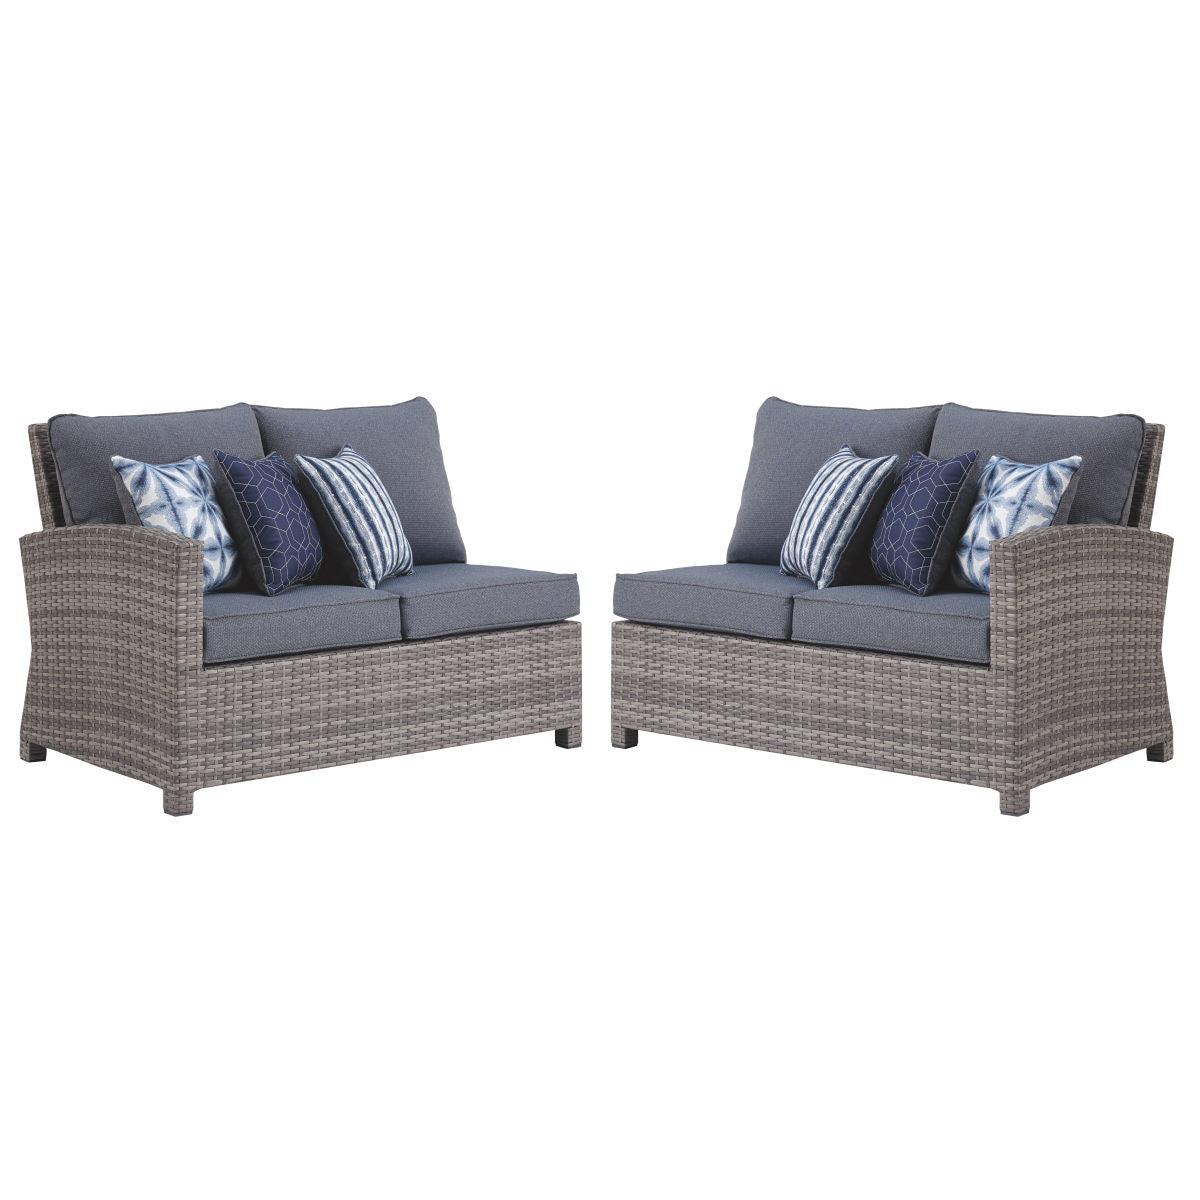 Salem Beach - Gray - 3 Pc. - Sectional Lounge Tony's Home Furnishings Furniture. Beds. Dressers. Sofas.